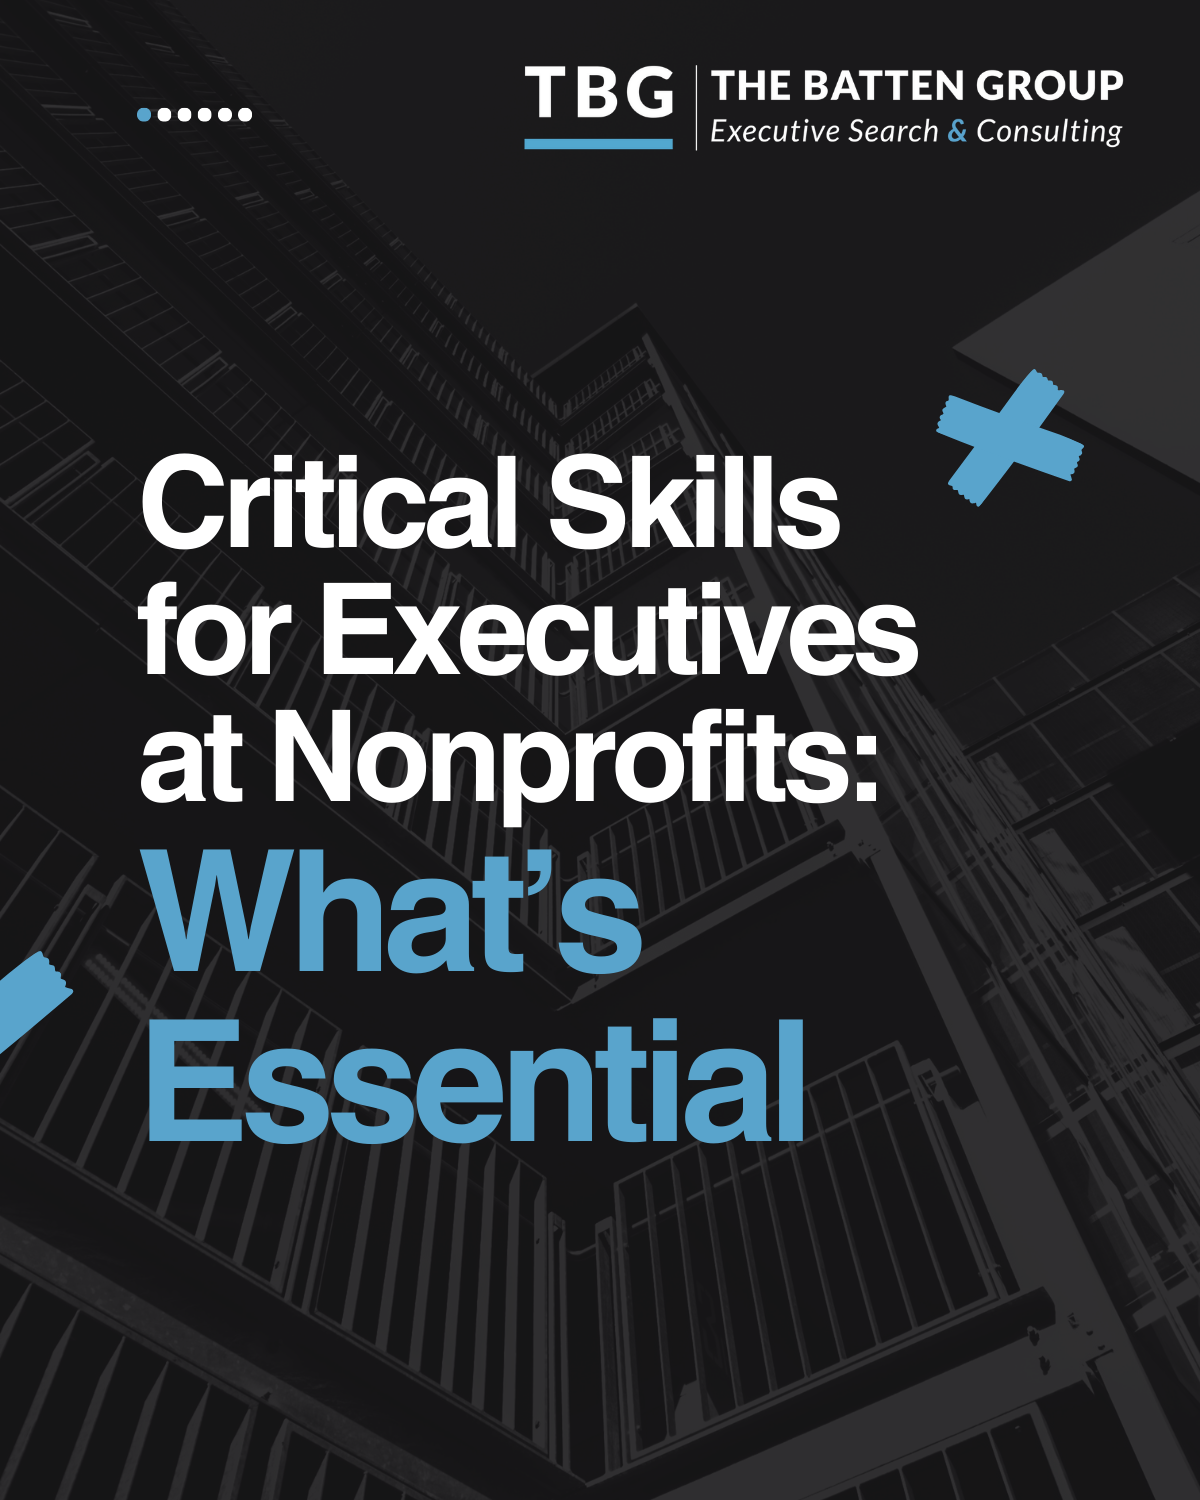 Critical Skills for Executives at Nonprofits: What's Essential